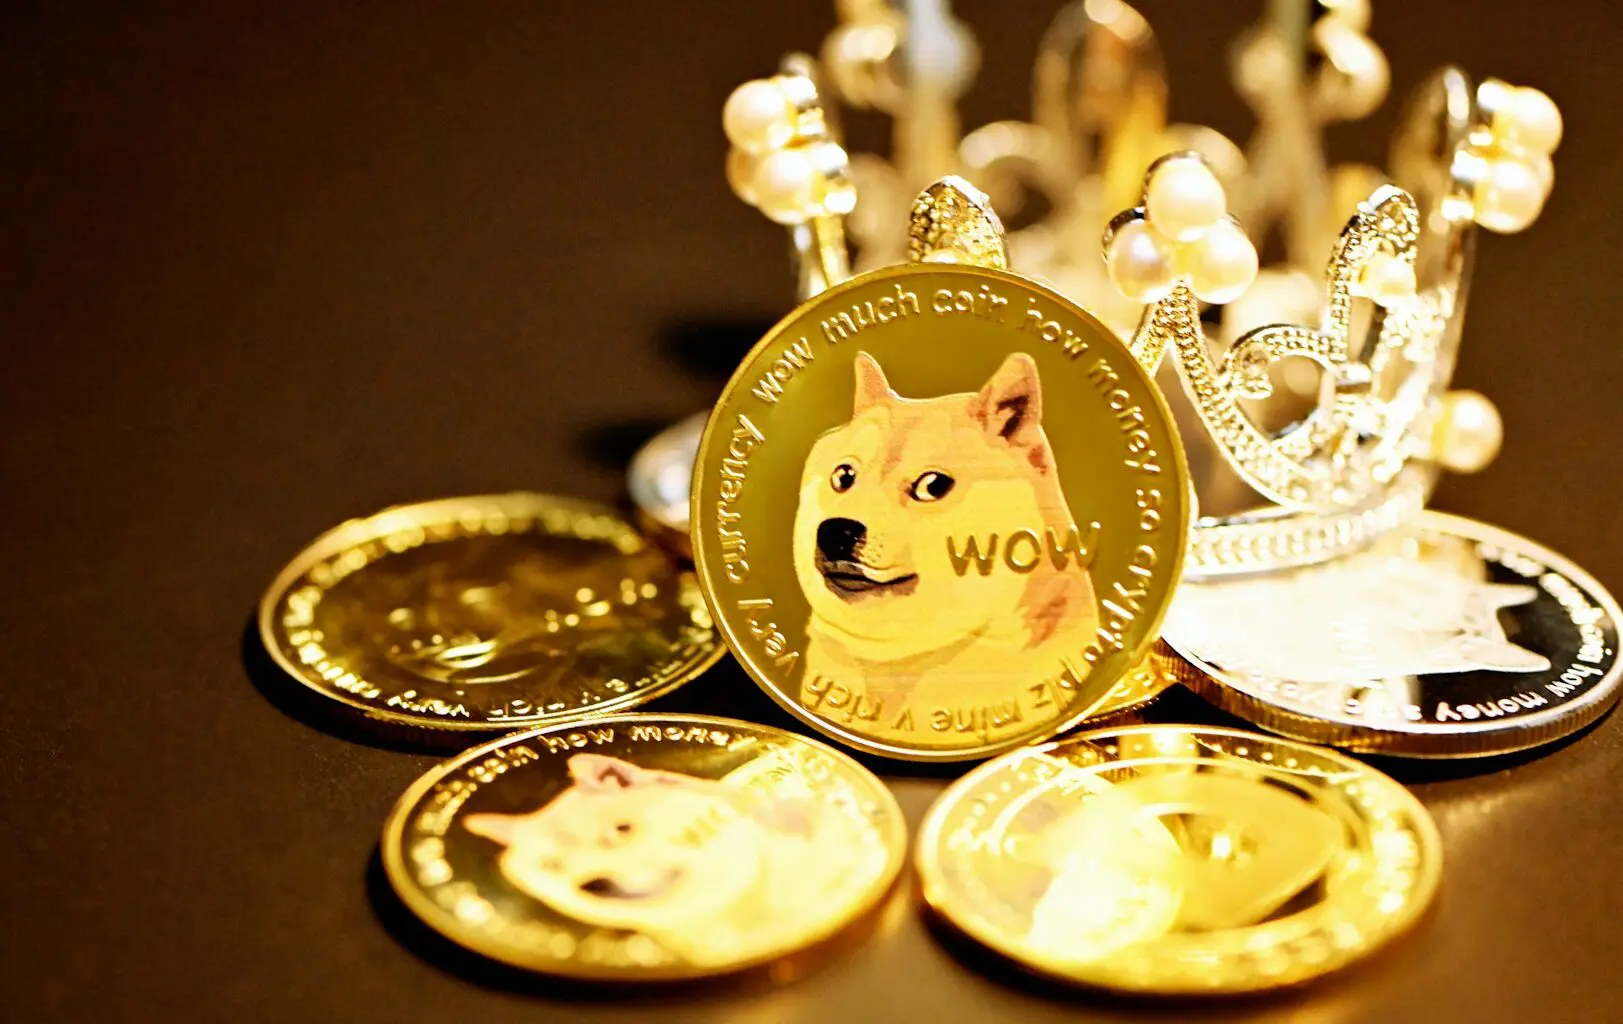 An image of a physical Shiba Inu coin.